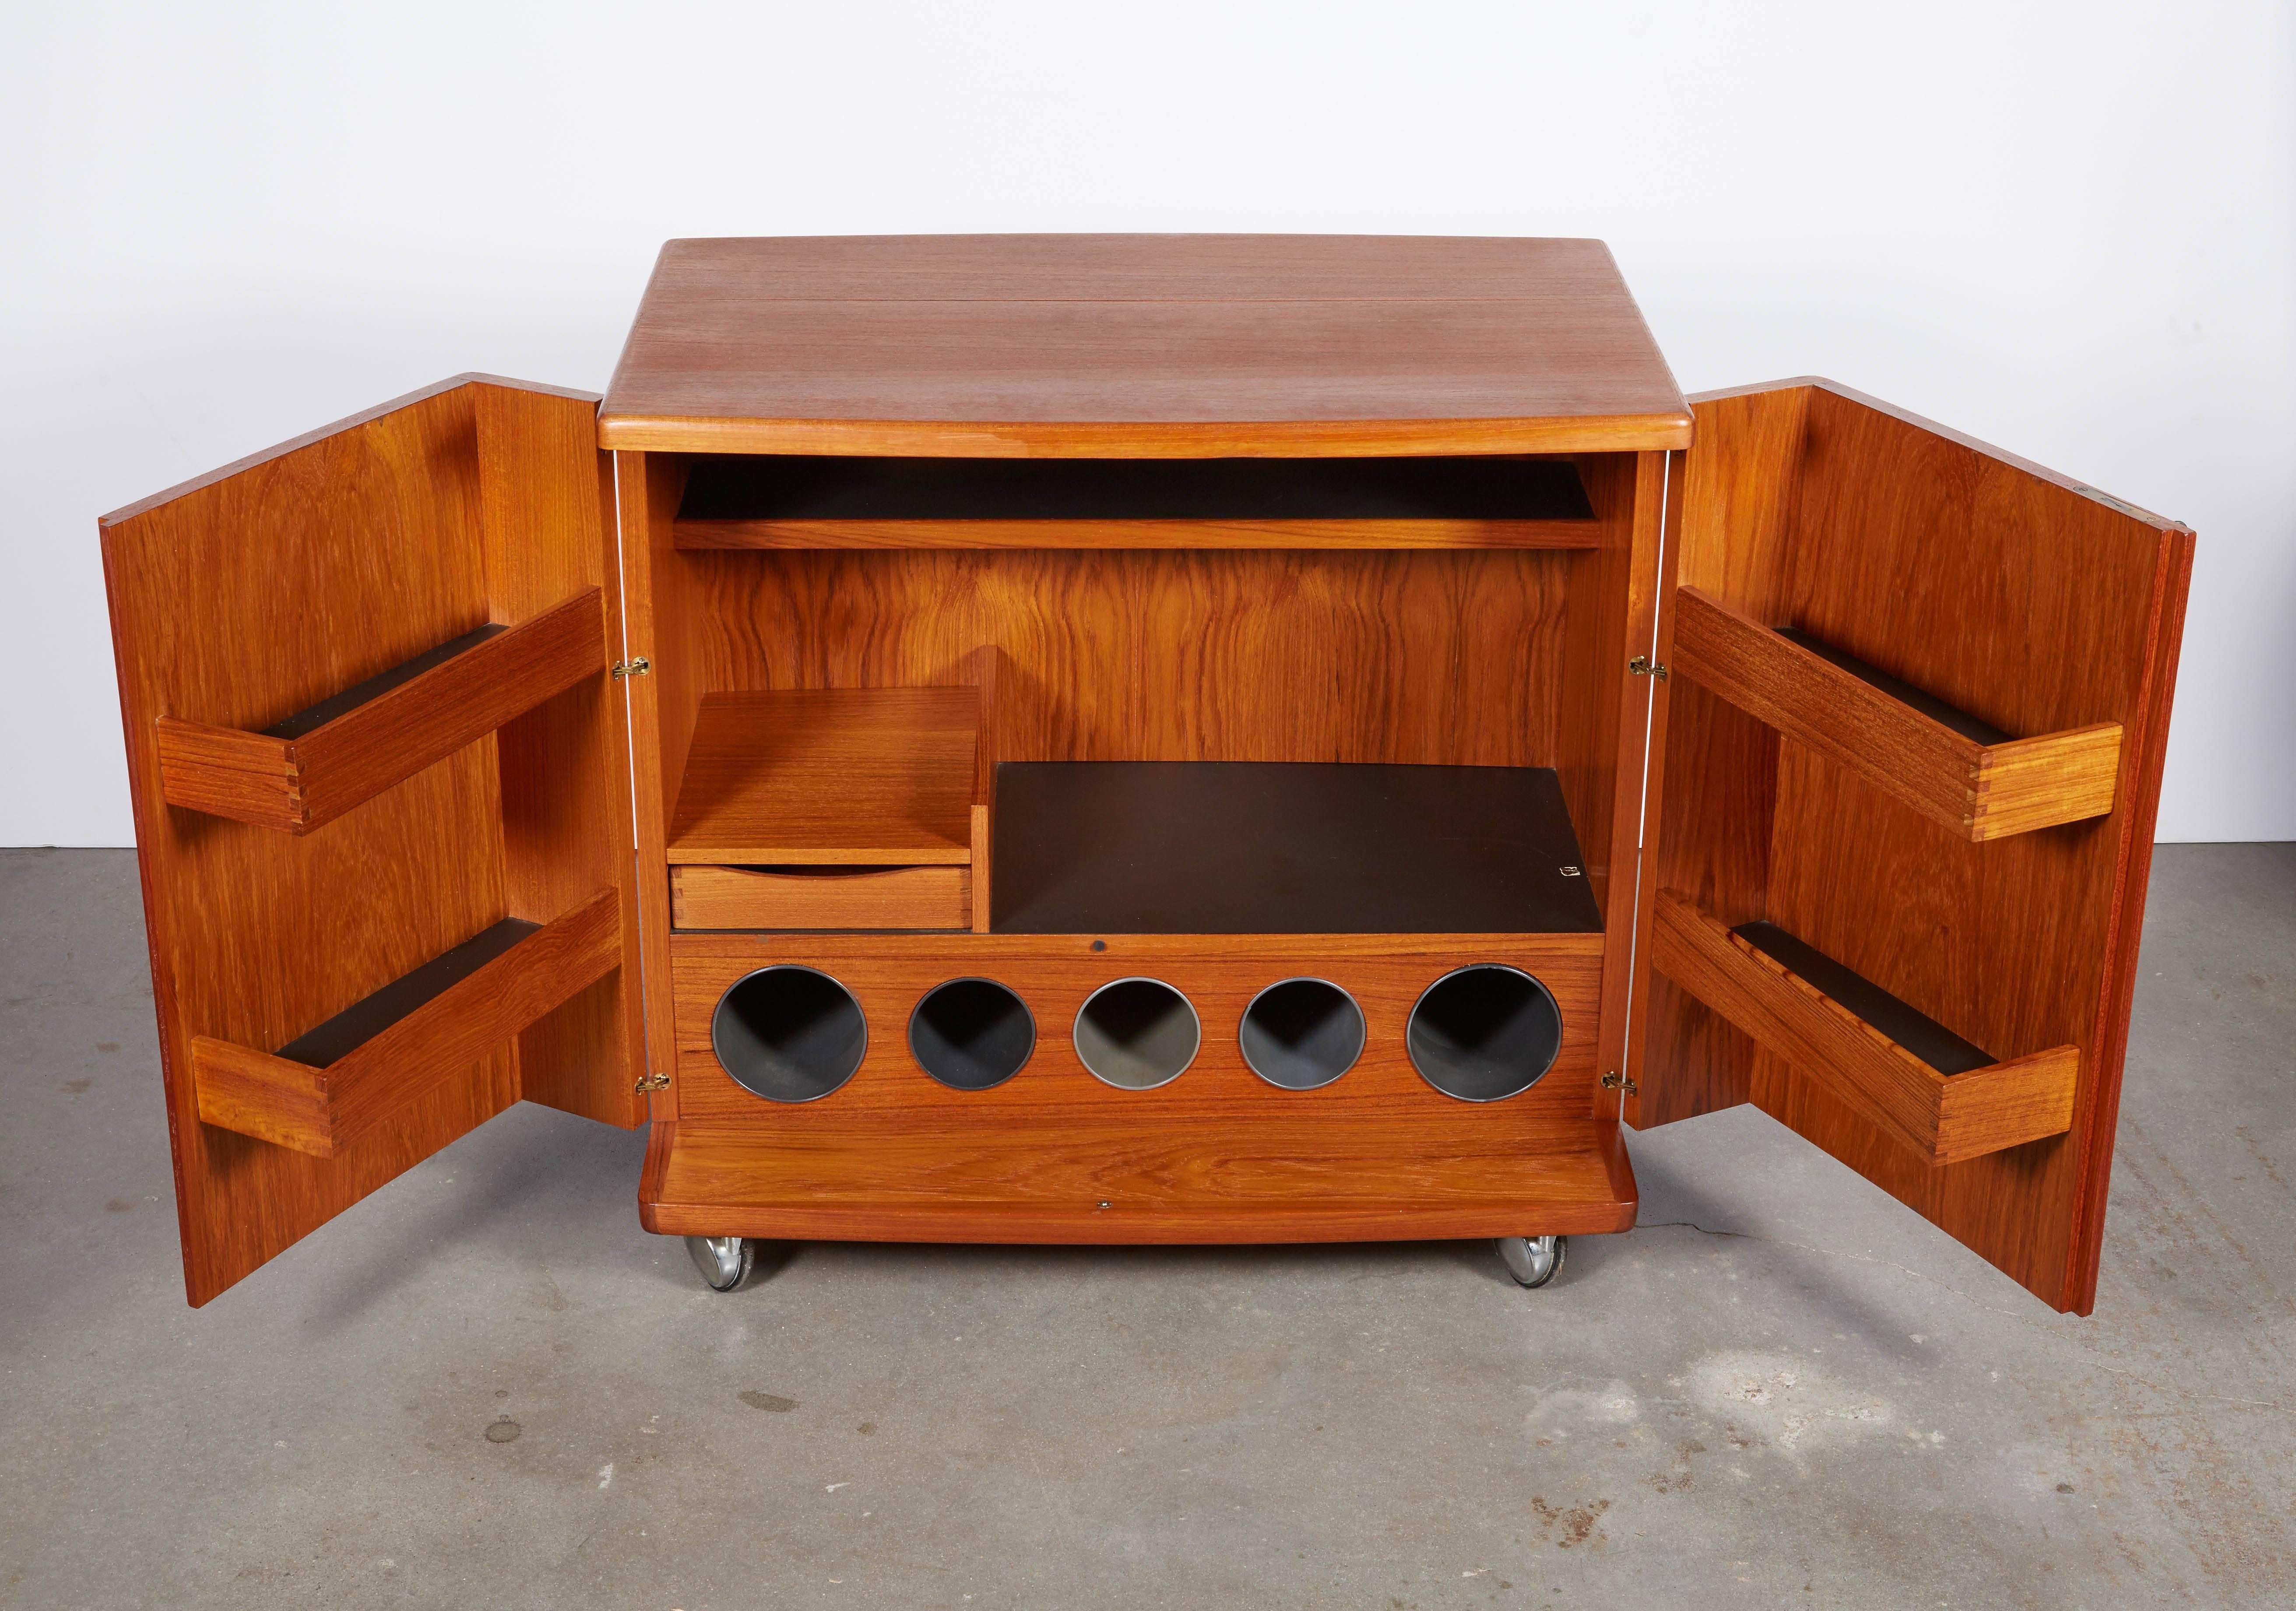 Vintage Teak Bar by CC Silkborg, 1960s

This mid century bar is in excellent condition, and is 100% portable! Roll it it to another room, or roll it to your neighbors house. Ready for pick up, delivery, or shipping anywhere in the world.